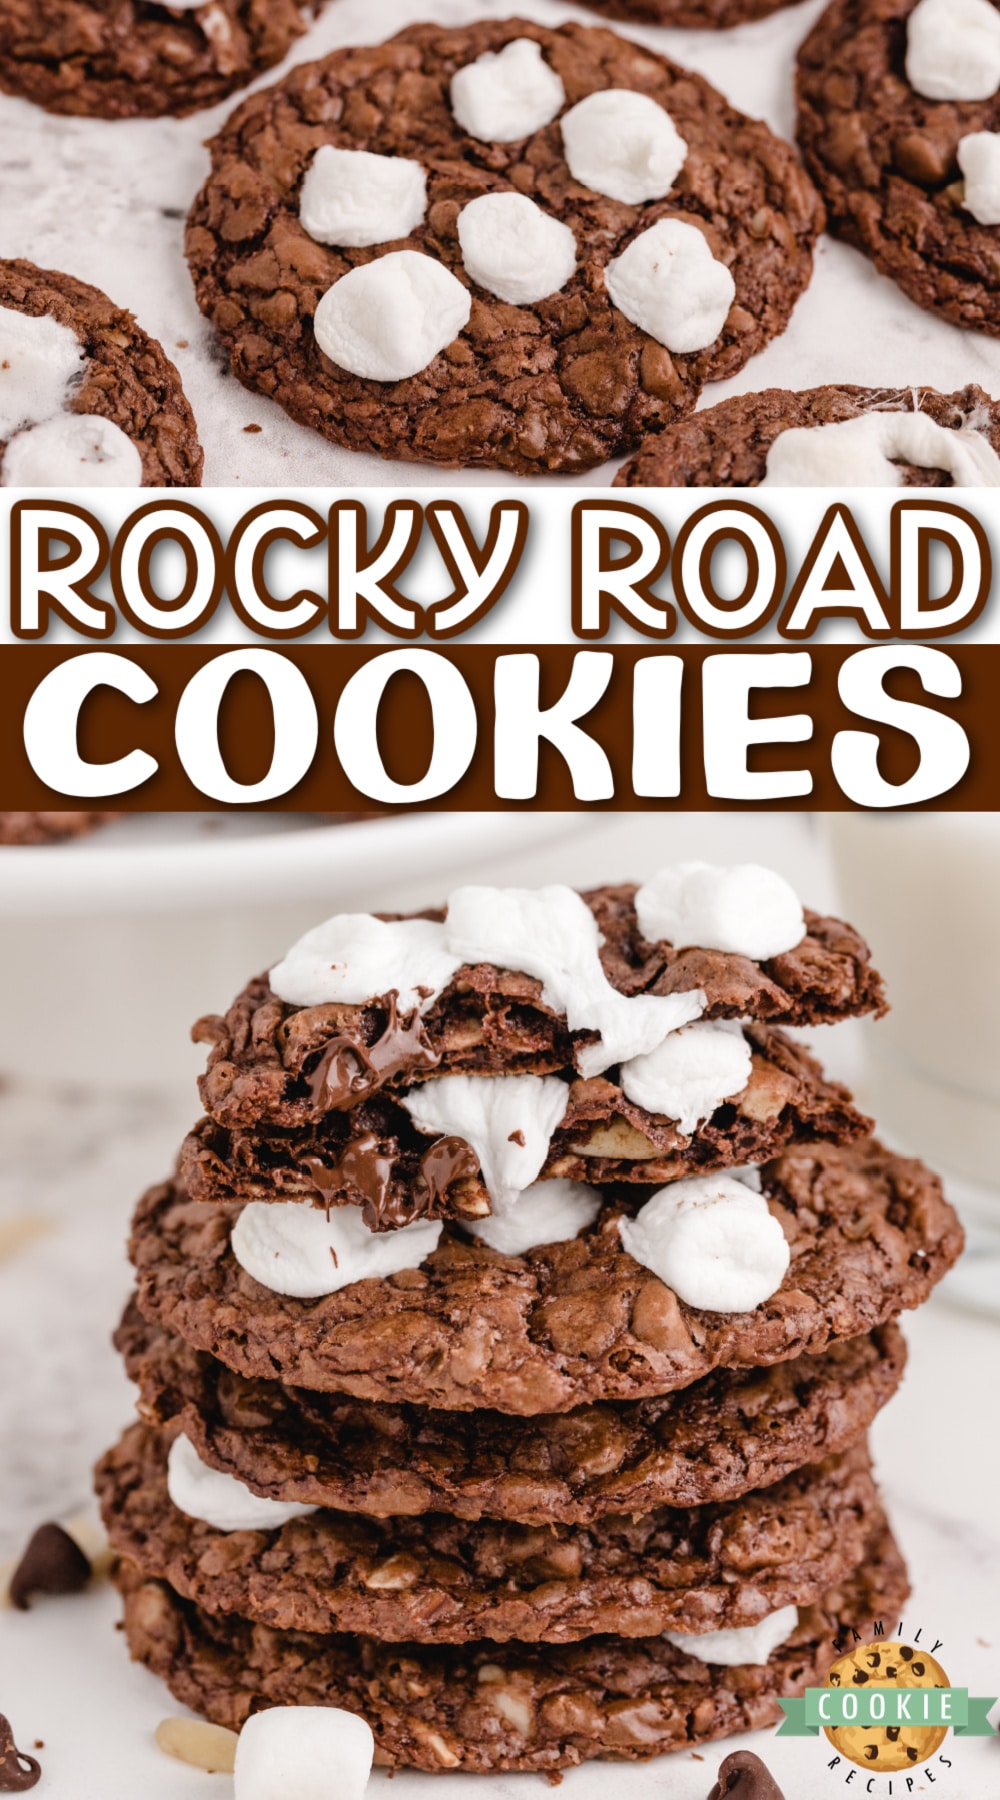 Rocky Road Cookies are rich, fudgy chocolate cookies made with chocolate chips, almonds and marshmallows. These easy Rocky Road cookies are absolutely amazing! 